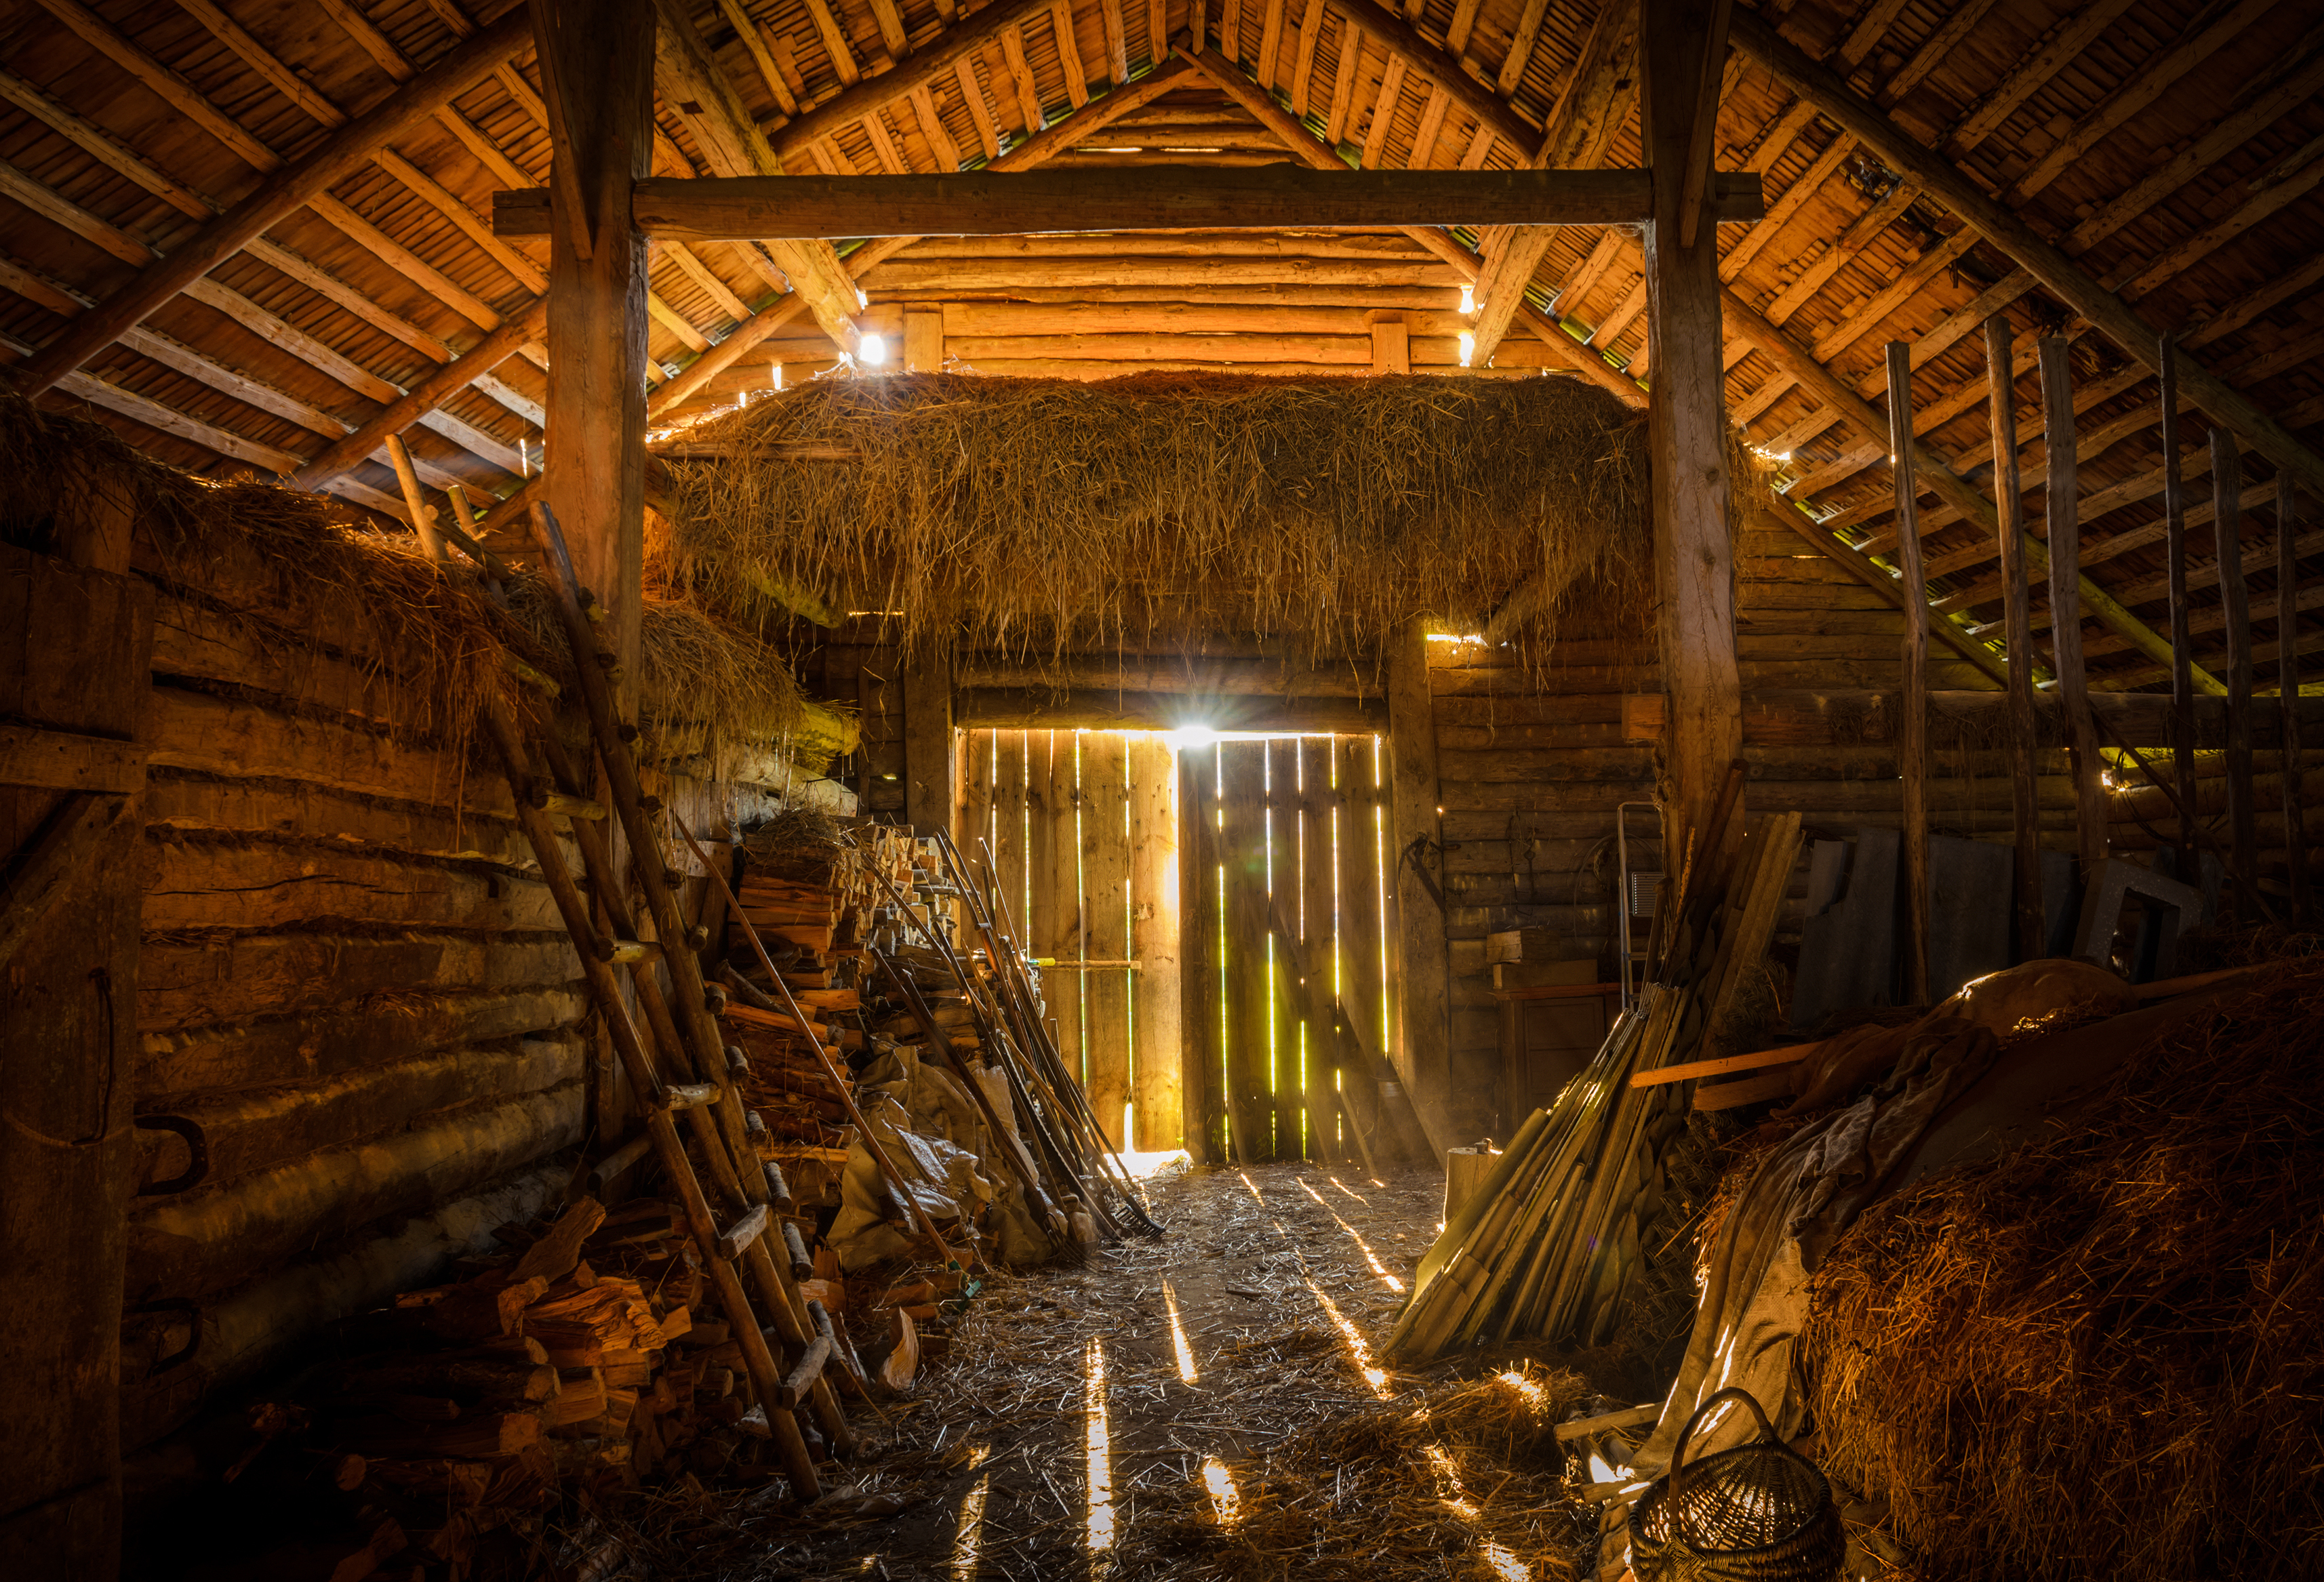 Interior view of the old rural barn | Source: Shutterstock